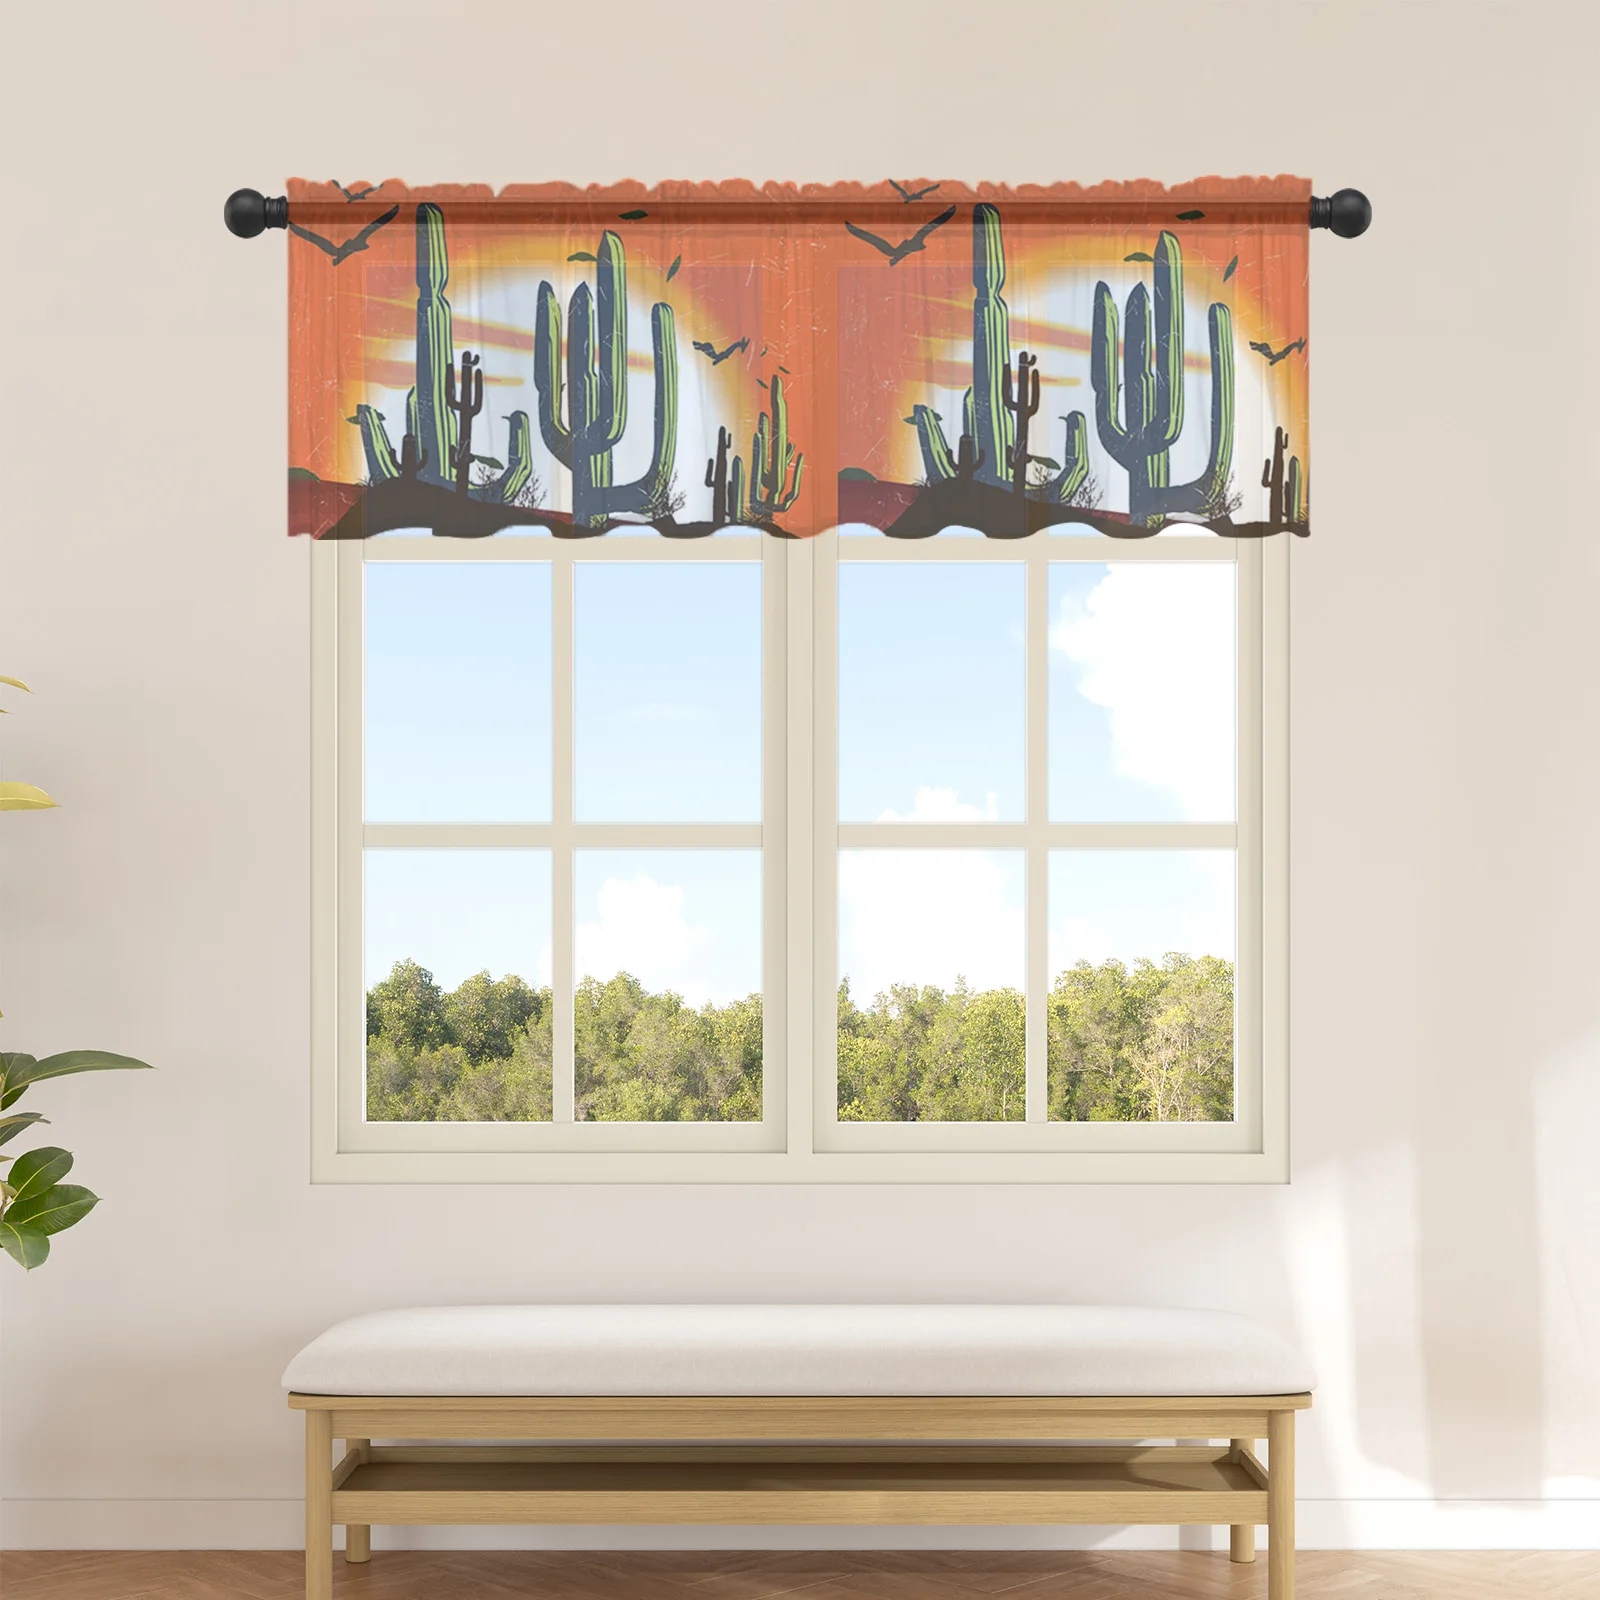 

Cactus Desert Sunset Sheer Curtains for Kitchen Cafe Half Short Tulle Curtain Window Valance Home Decor